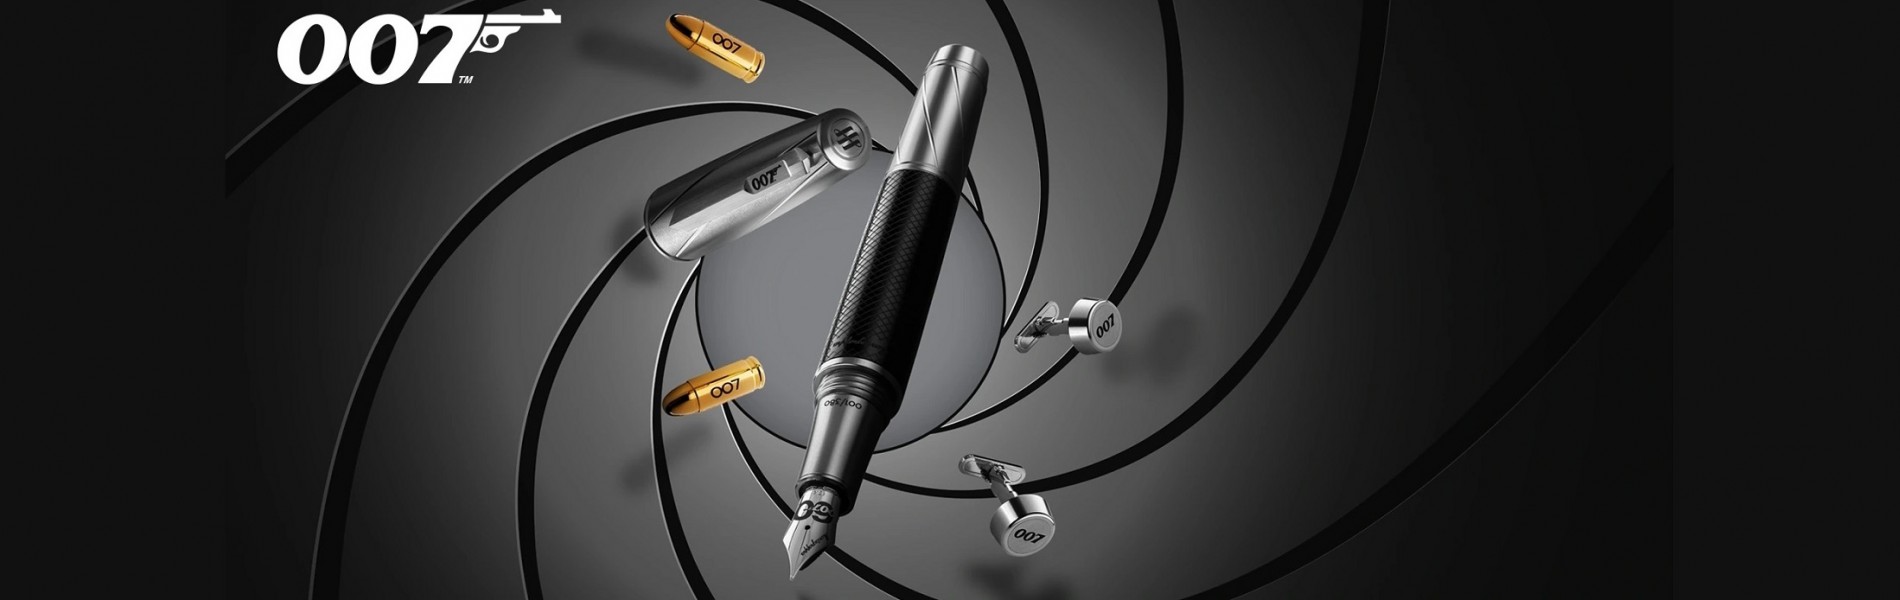 Montegrappa Spymaster Duo Limited Edition